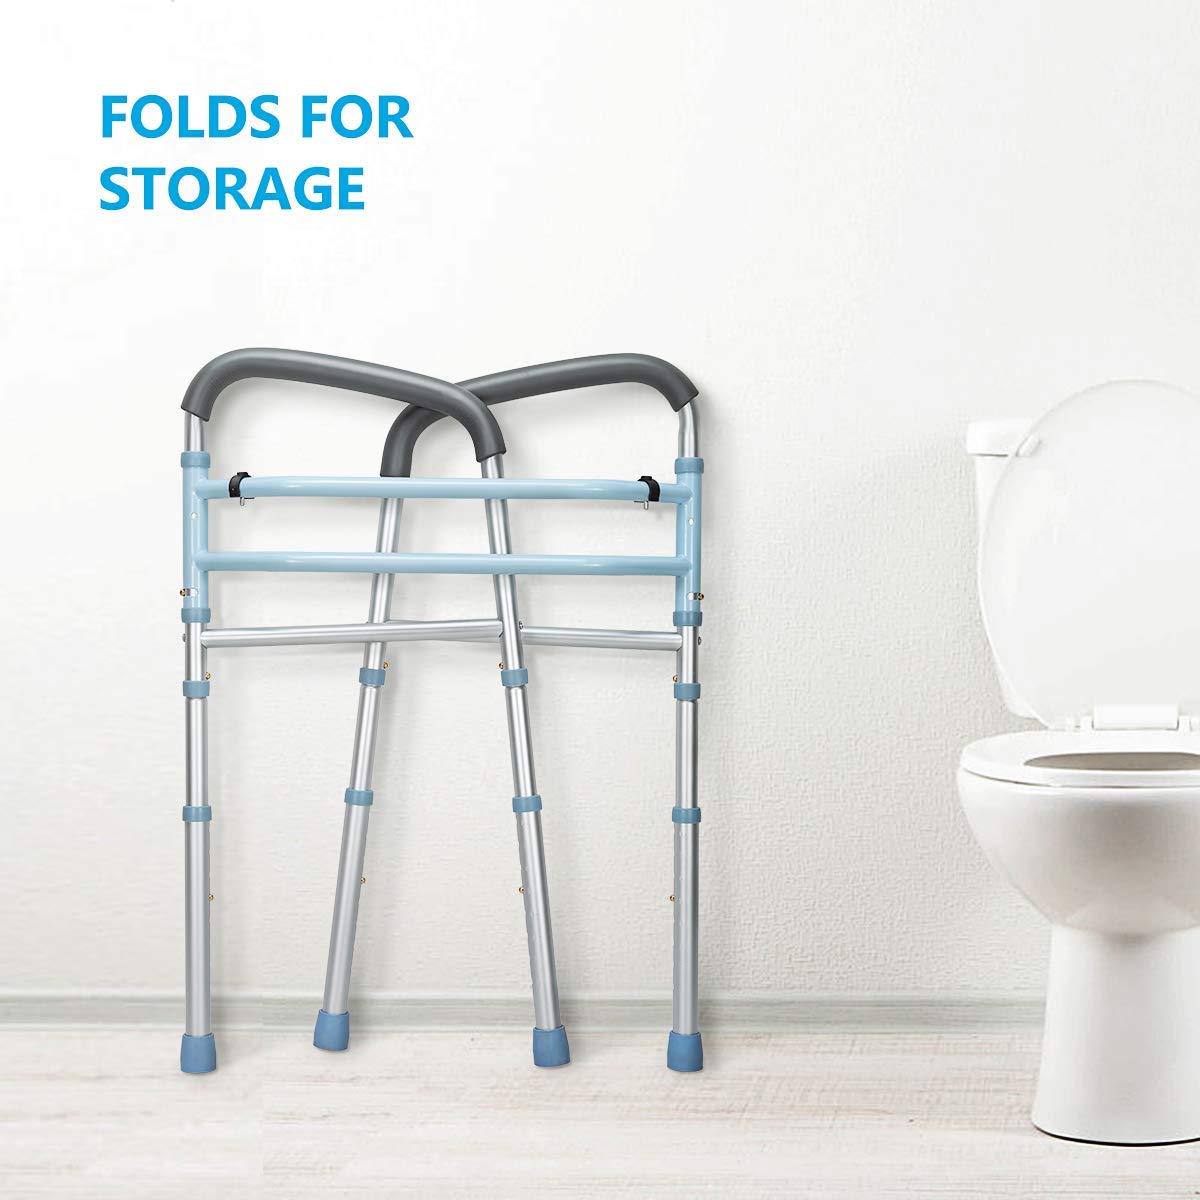 OasisSpace Stand Alone Toilet Safety Rail - Heavy Duty Medical Toilet Safety Frame for Elderly, Handicap and Disabled - Adjustable Bathroom Toilet Handrails Grab Bar, Fit Any Toilet